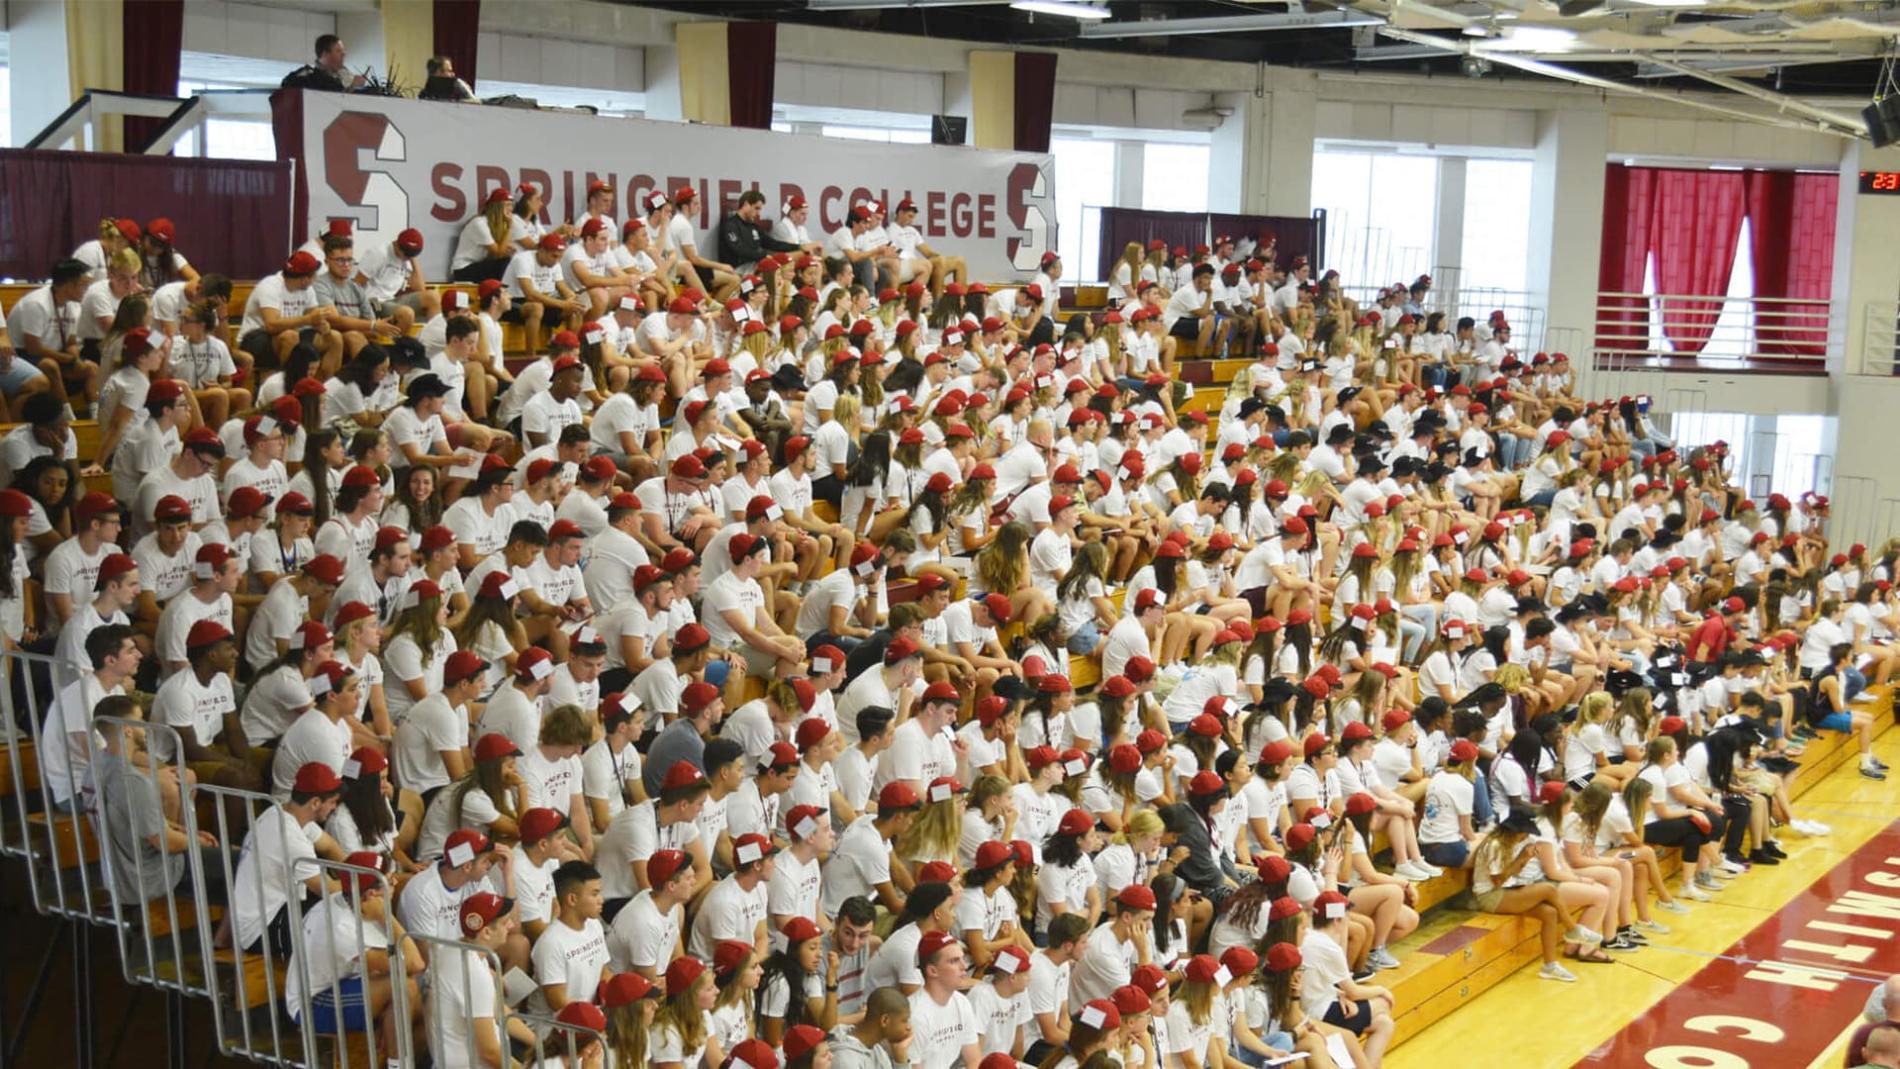 New students sit in the bleachers wearing beanies for their convocation.